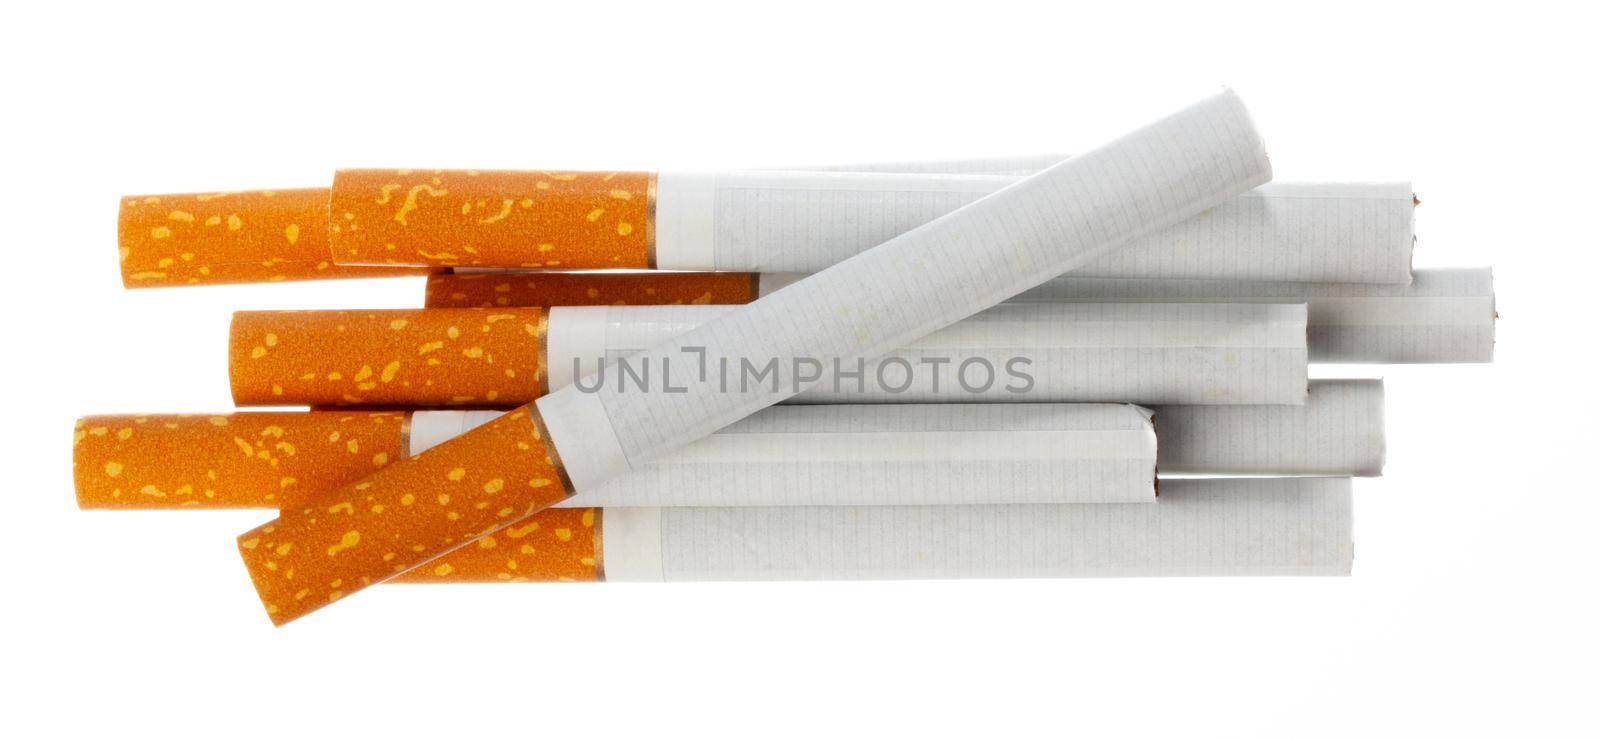 Bunch of unlit cigarettes isolated on white by Fabrikasimf